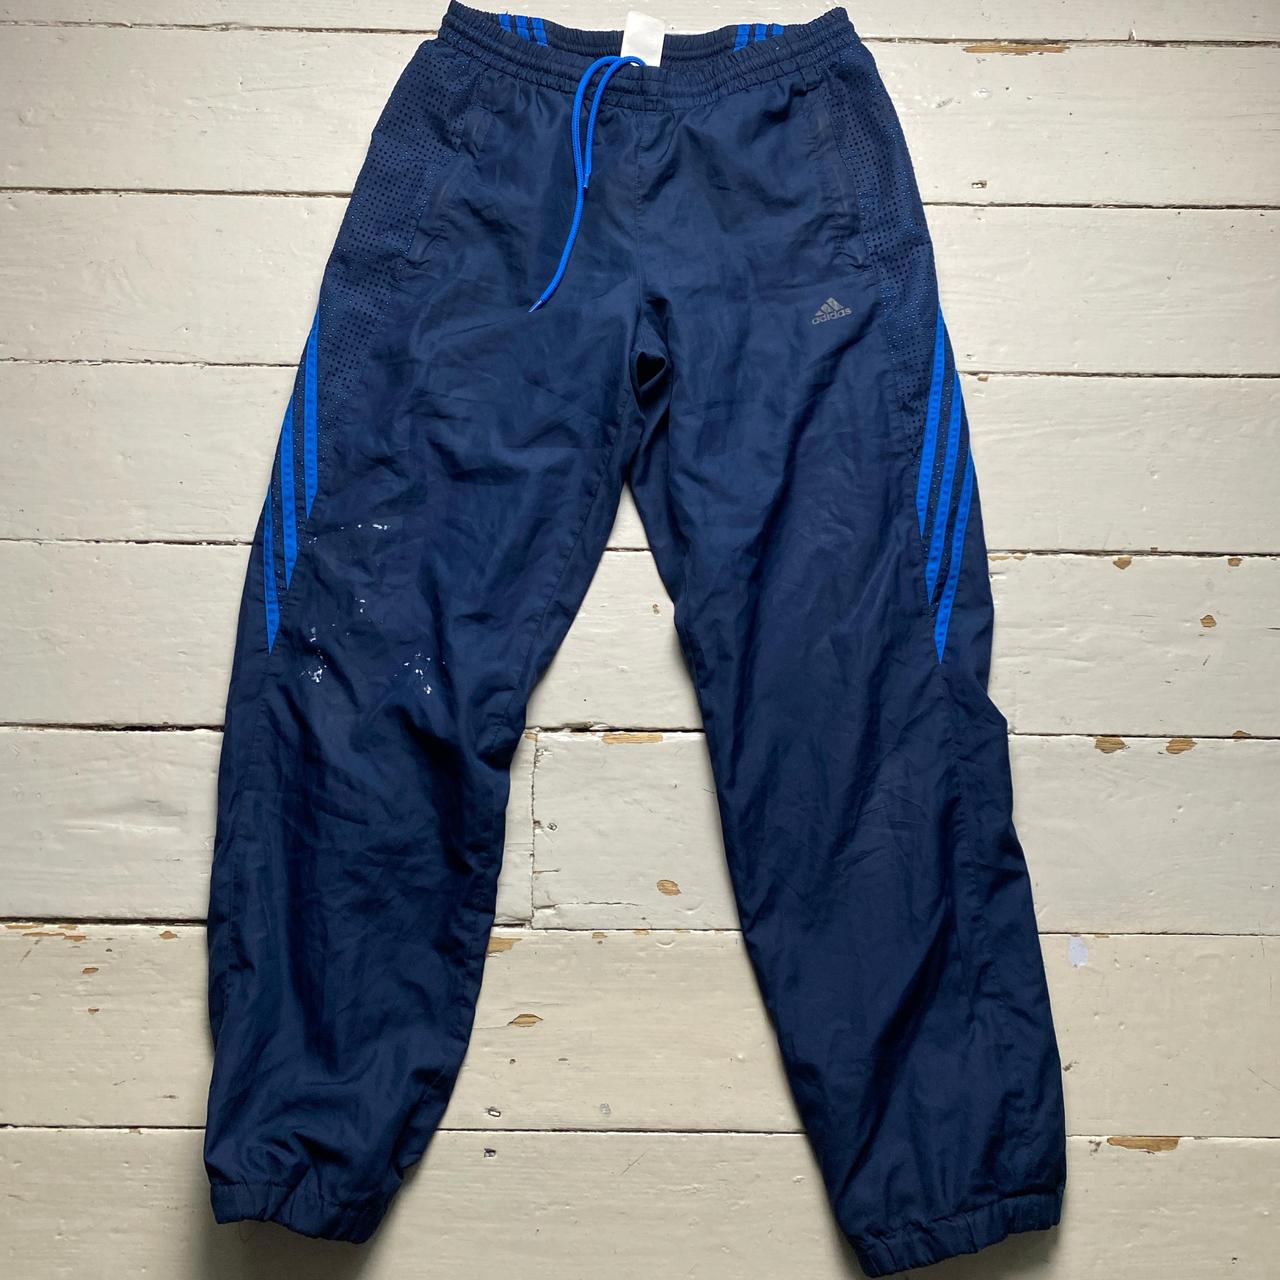 Adidas Navy and Blue Stripe Shell Trackpant Baggy Bottoms